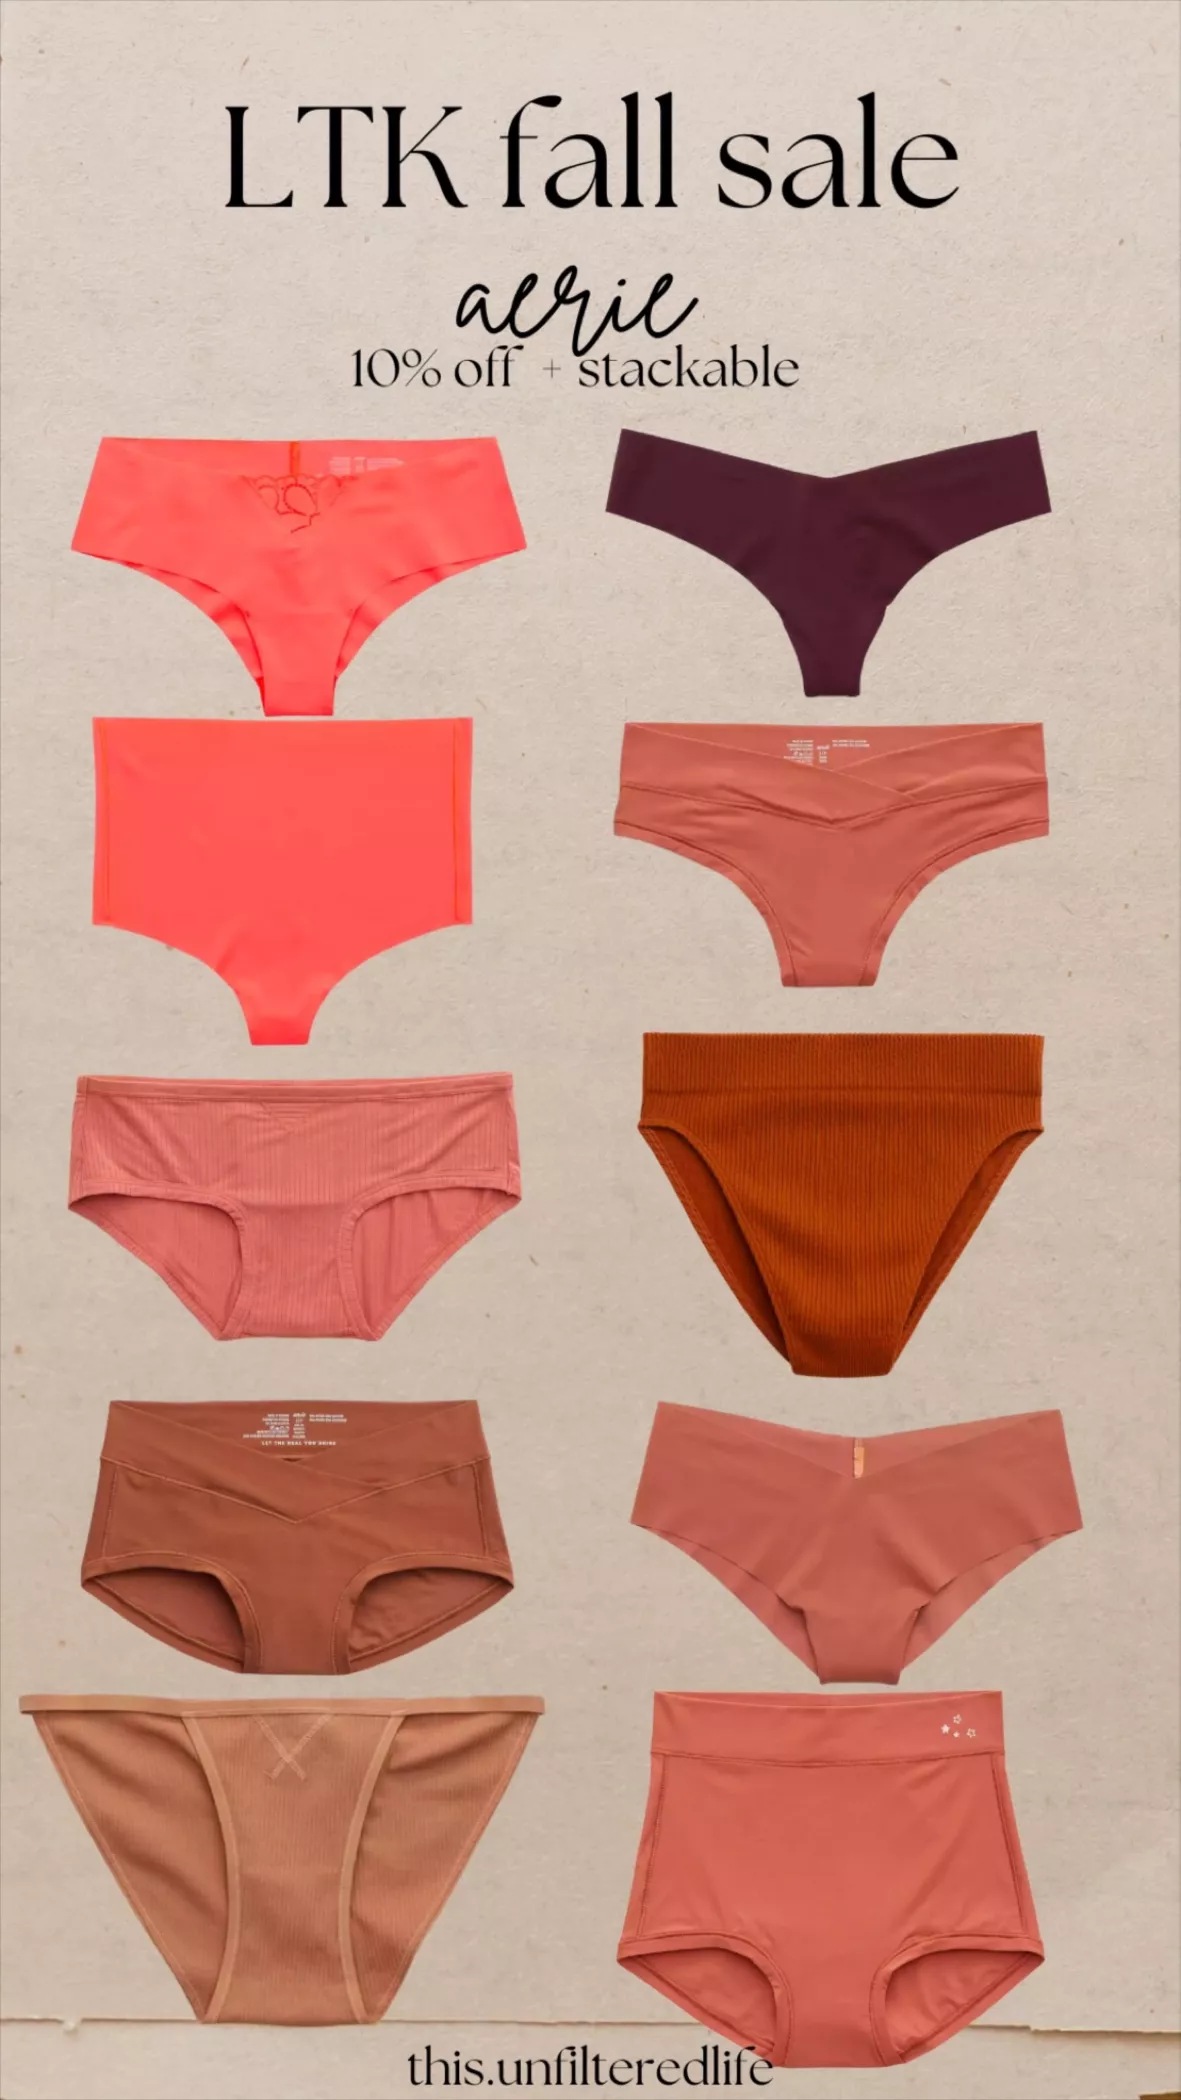 Madewell Just Launched Lingerie—And You'll Want To Live In It